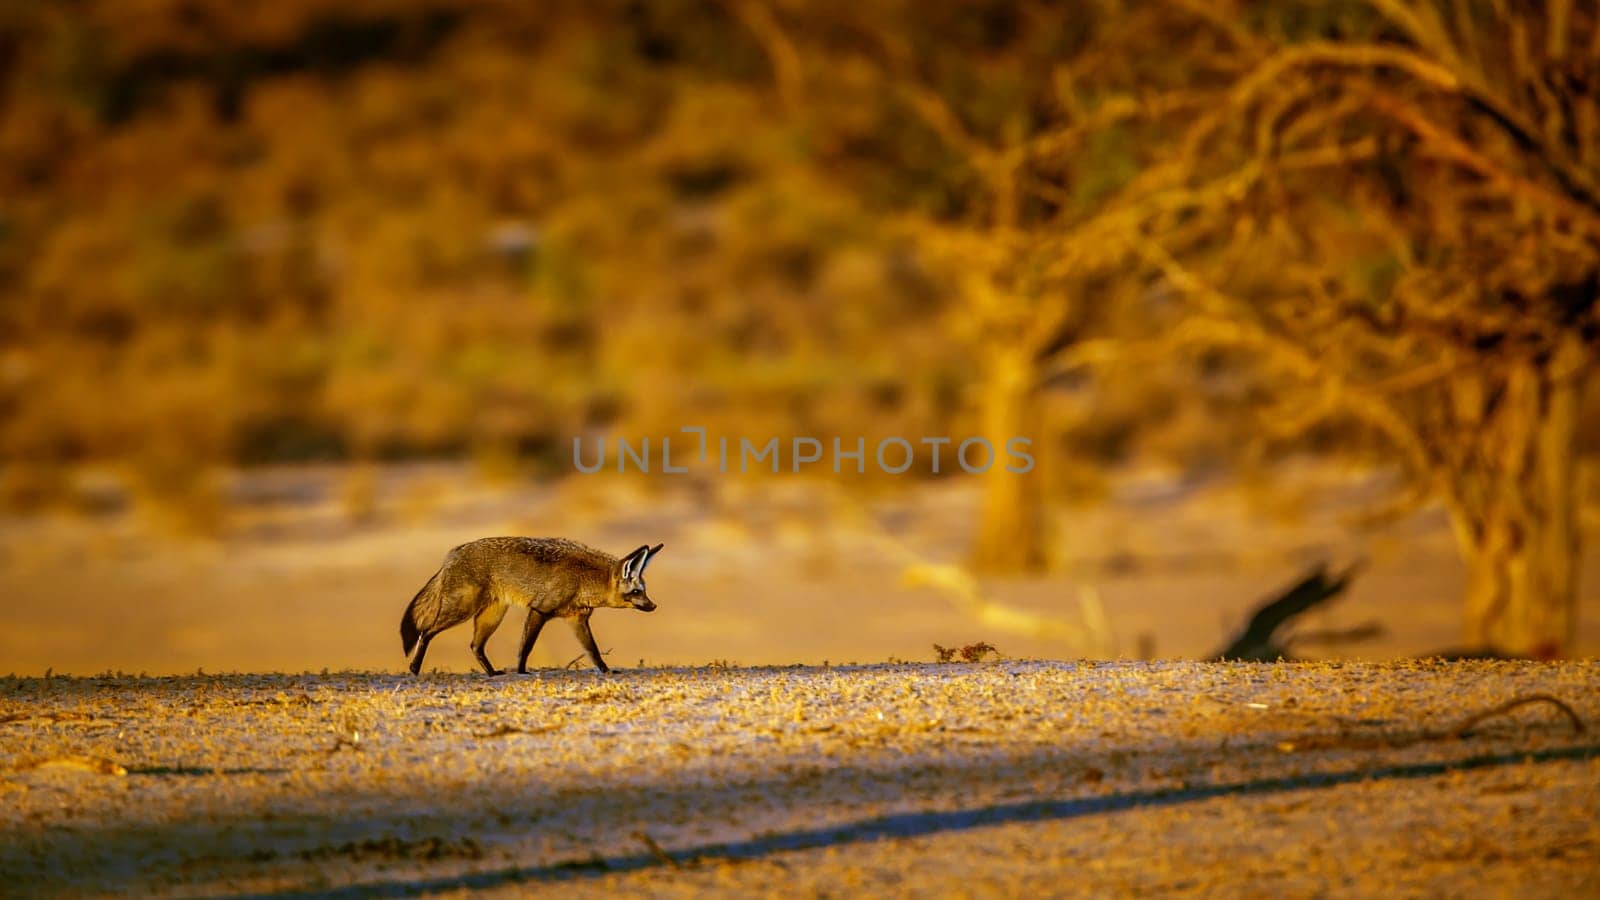 Bat eared fox in Kglalagadi transfrontier park, South Africa by PACOCOMO